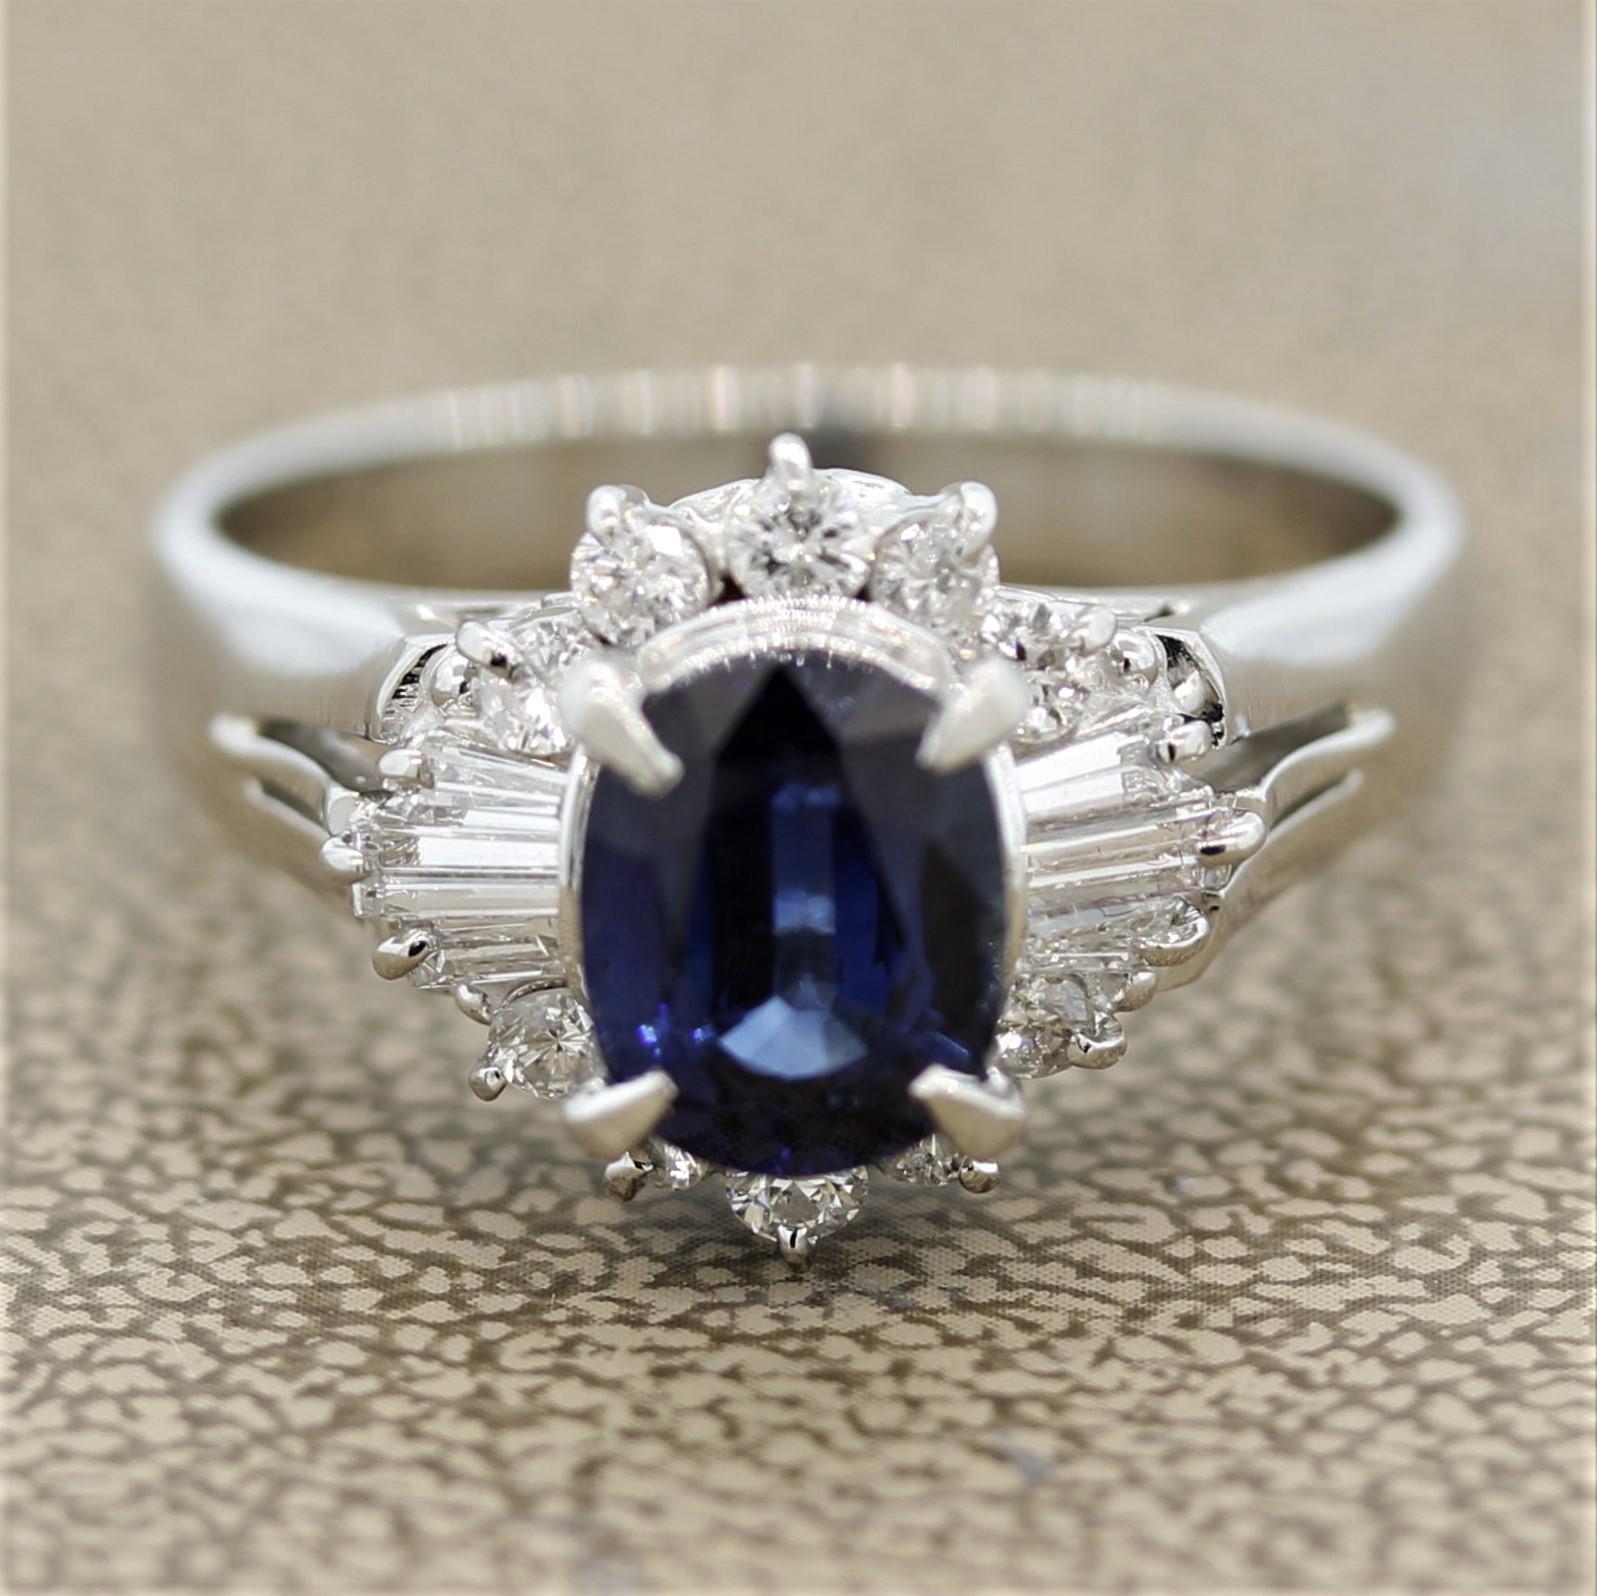 A lovely ring featuring a 2.07 carat oval shaped sapphire. It has a sweet and lively blue color which is free from any visible inclusions. It is surrounded by 0.61 carats of baguette and round brilliant cut diamonds set around the sapphire in a